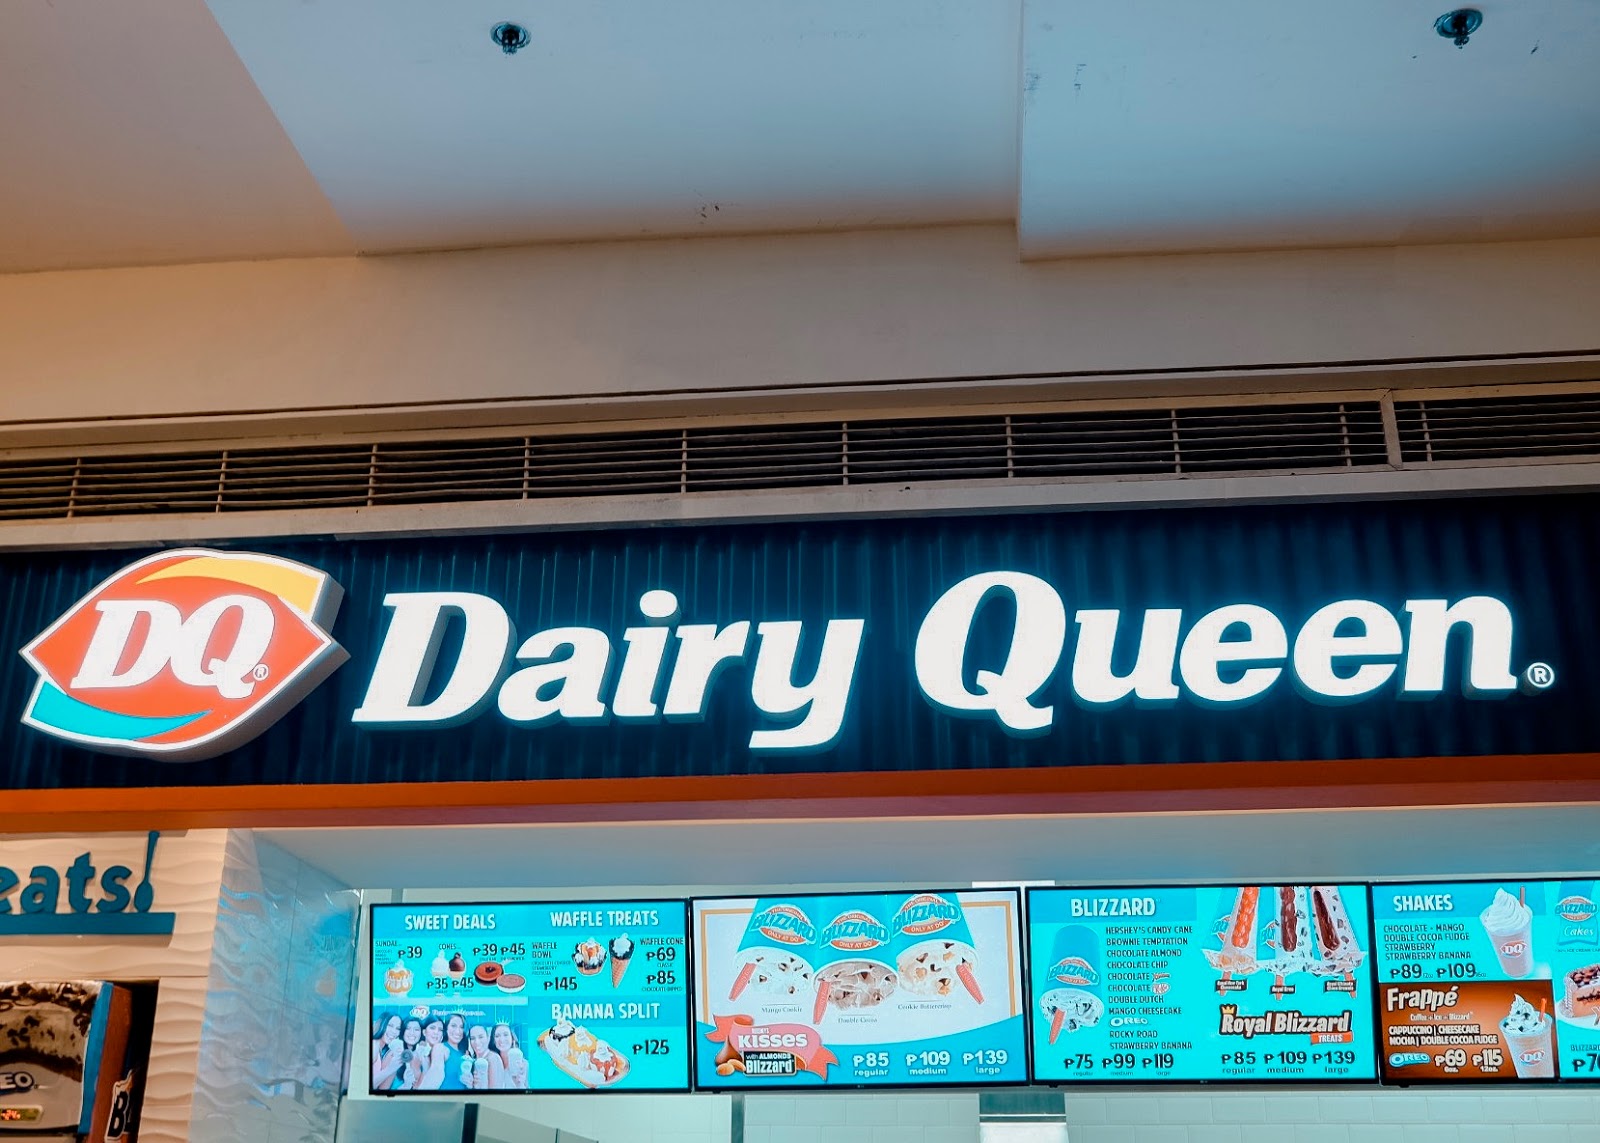 Dairy Queen Ice Cream: Turning the Cebuanos' World Upside Down